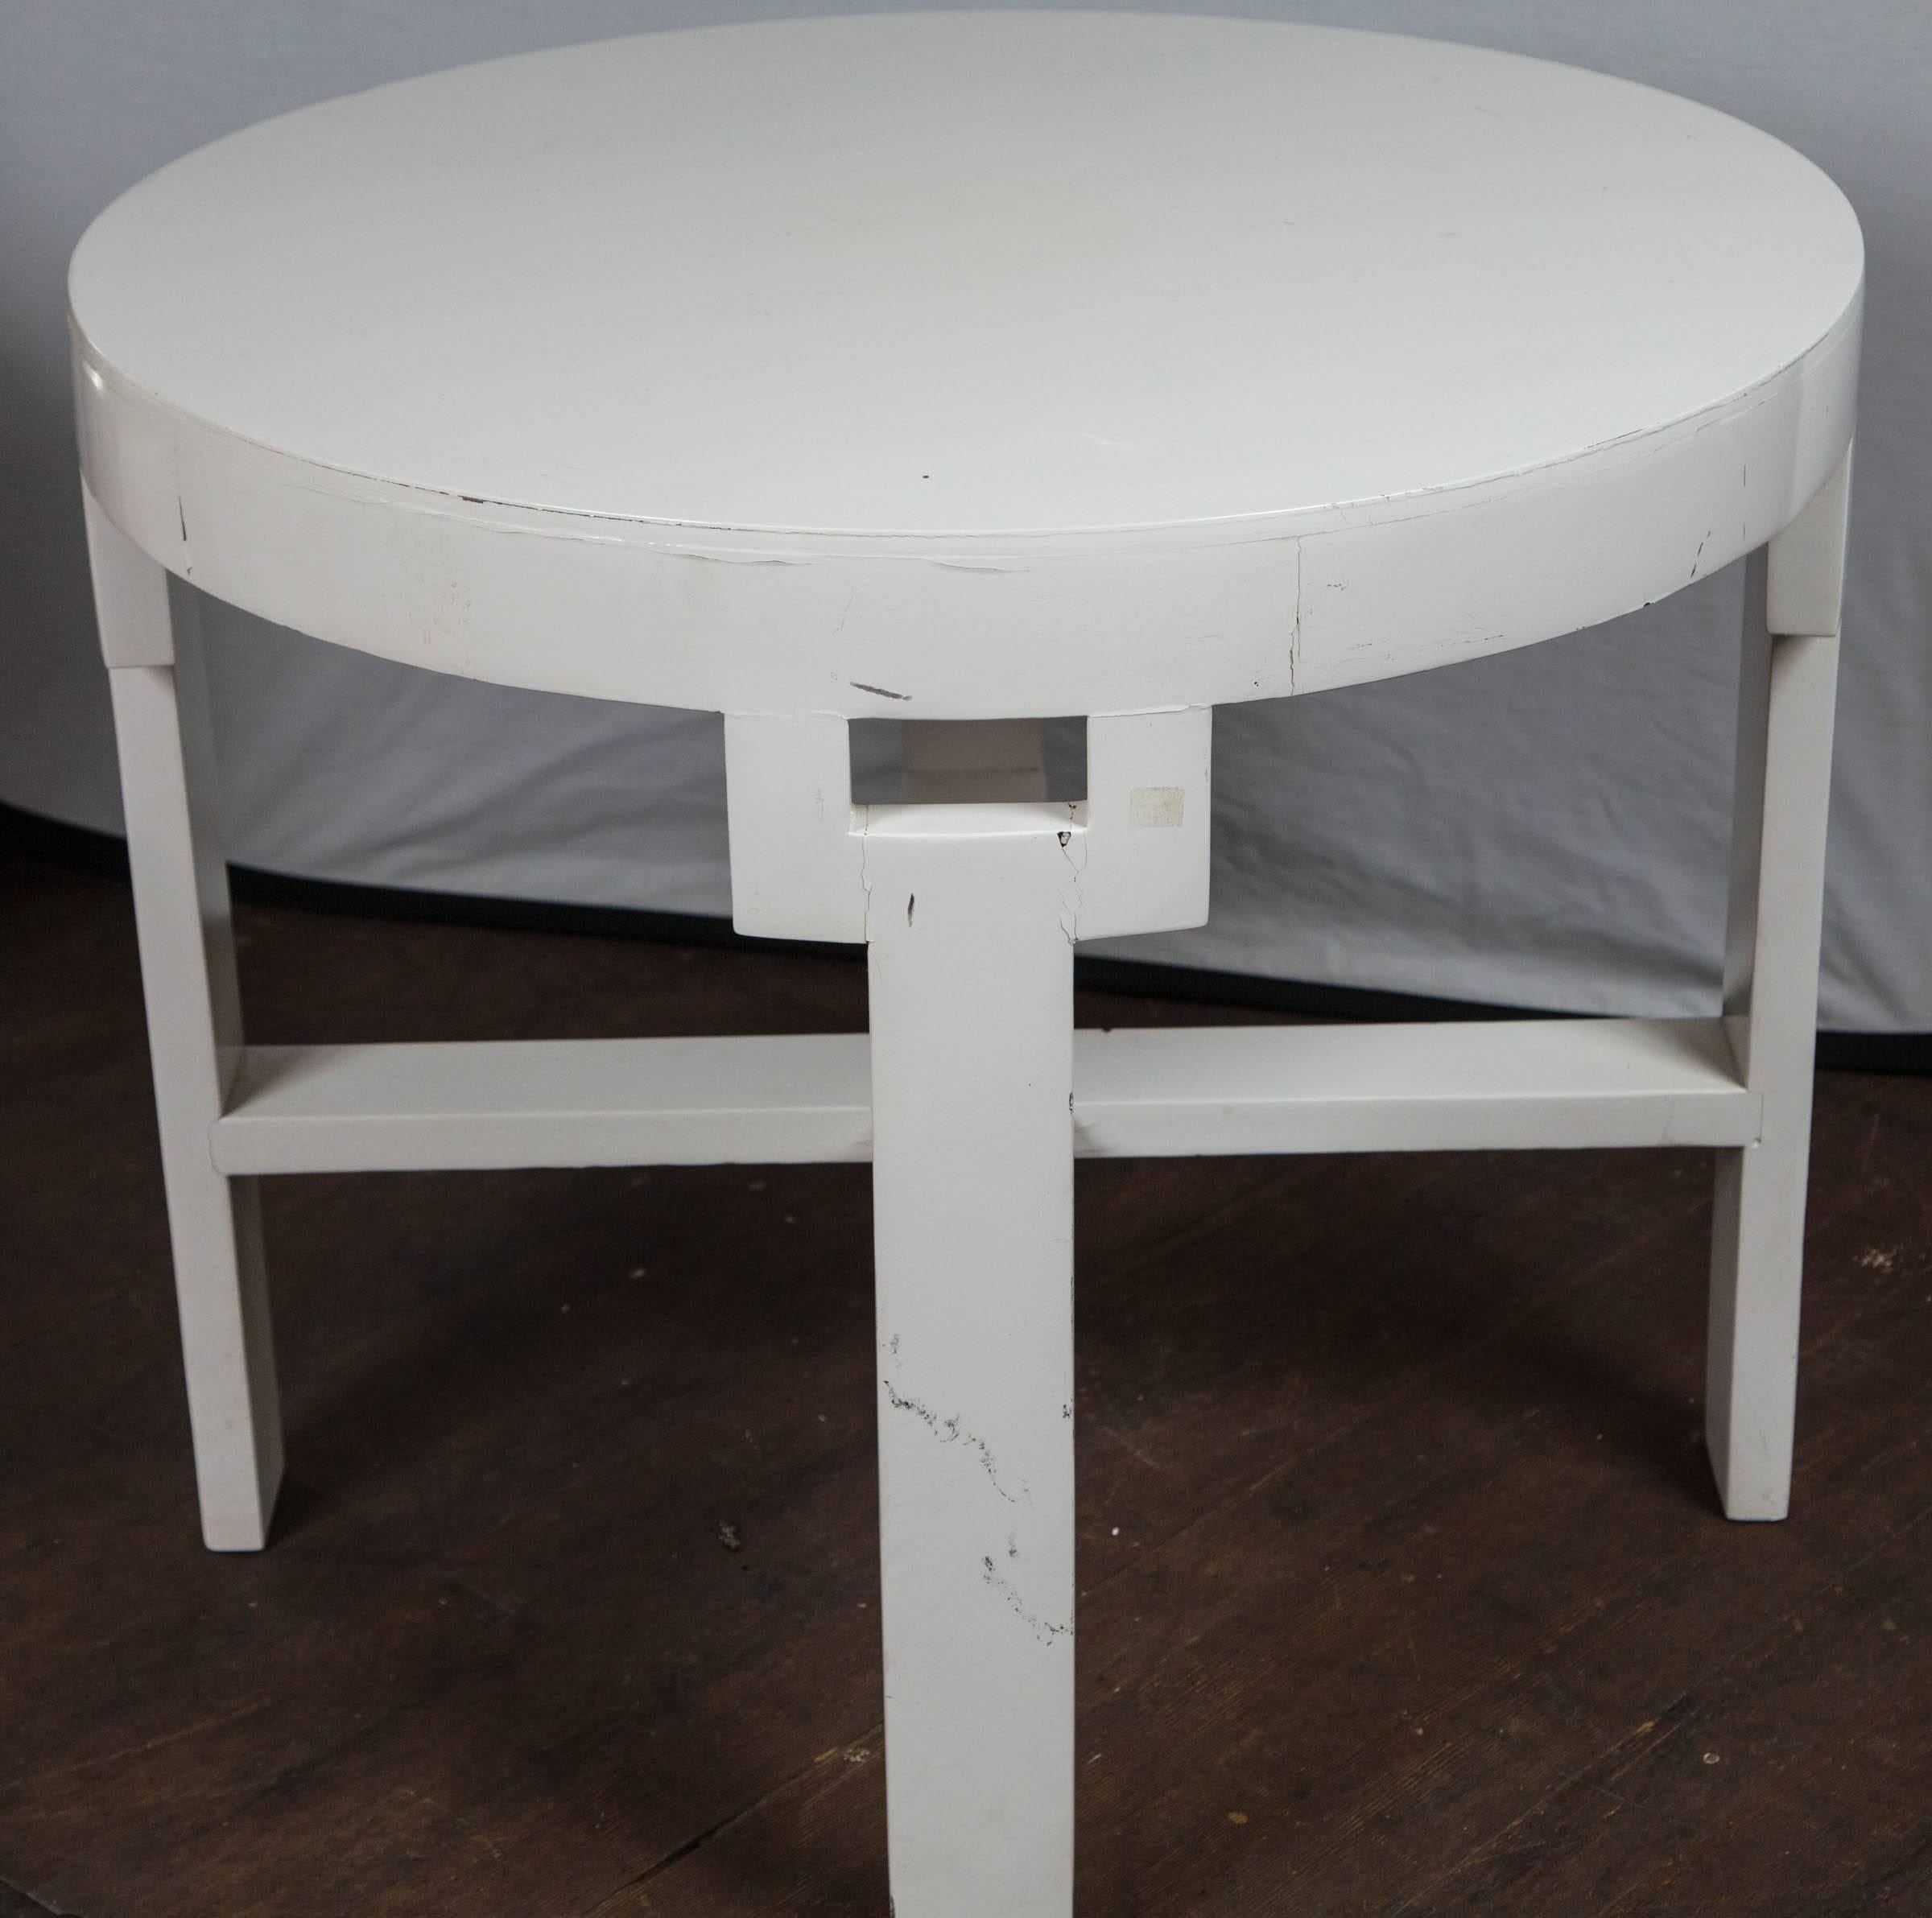 American Authentic Dorothy Draper Round Side Table Custom-Made for the Greenbrier Resort